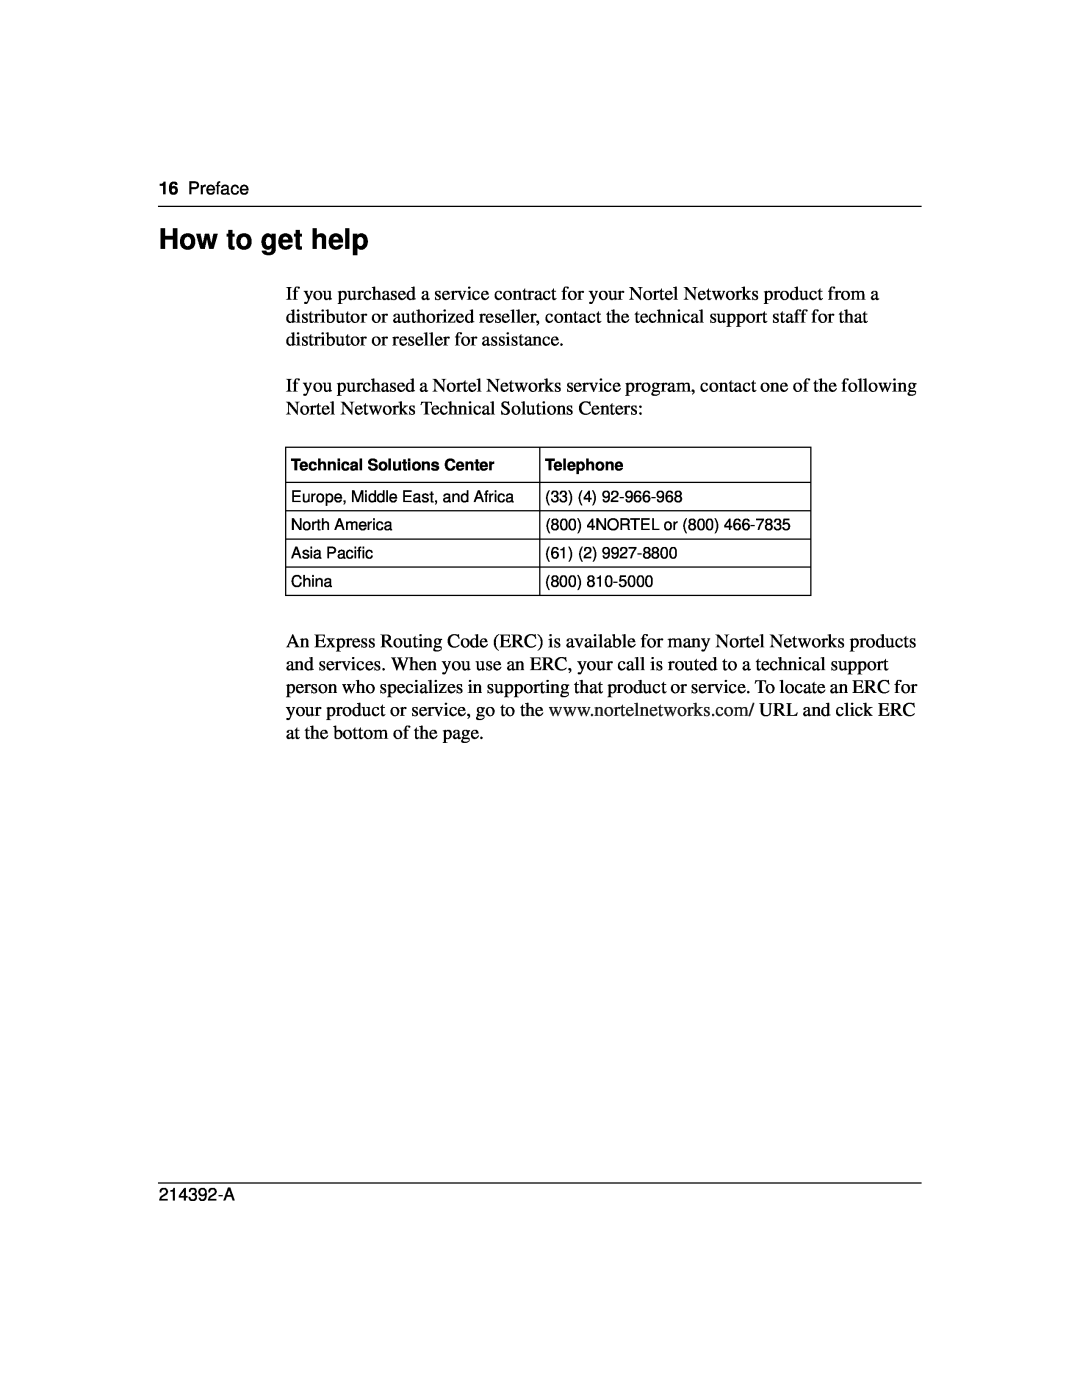 Nortel Networks 380-24F manual How to get help, Technical Solutions Center, Telephone 